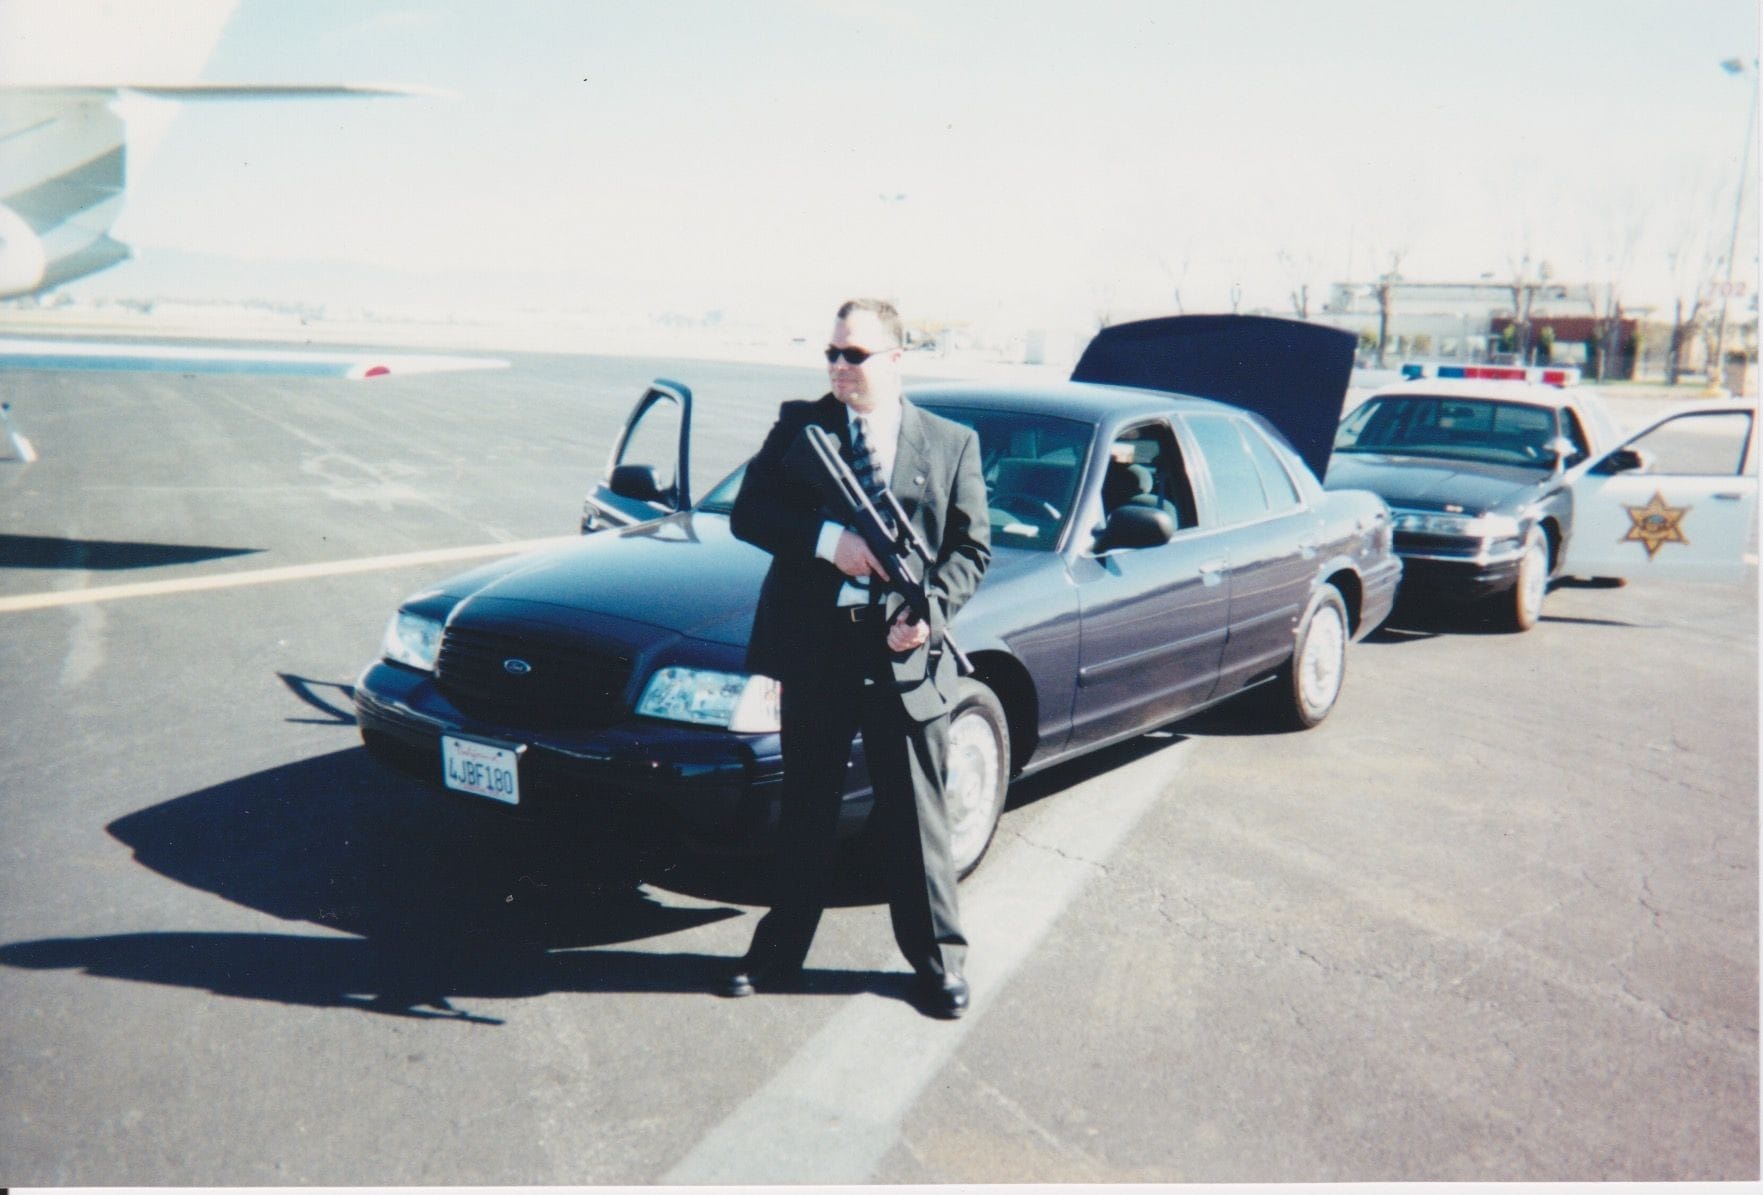 Jim was the Team Leader of the Orange County Sheriff's Department on the Dignitary Protection Unit (DPU) from 2000 to 2002.